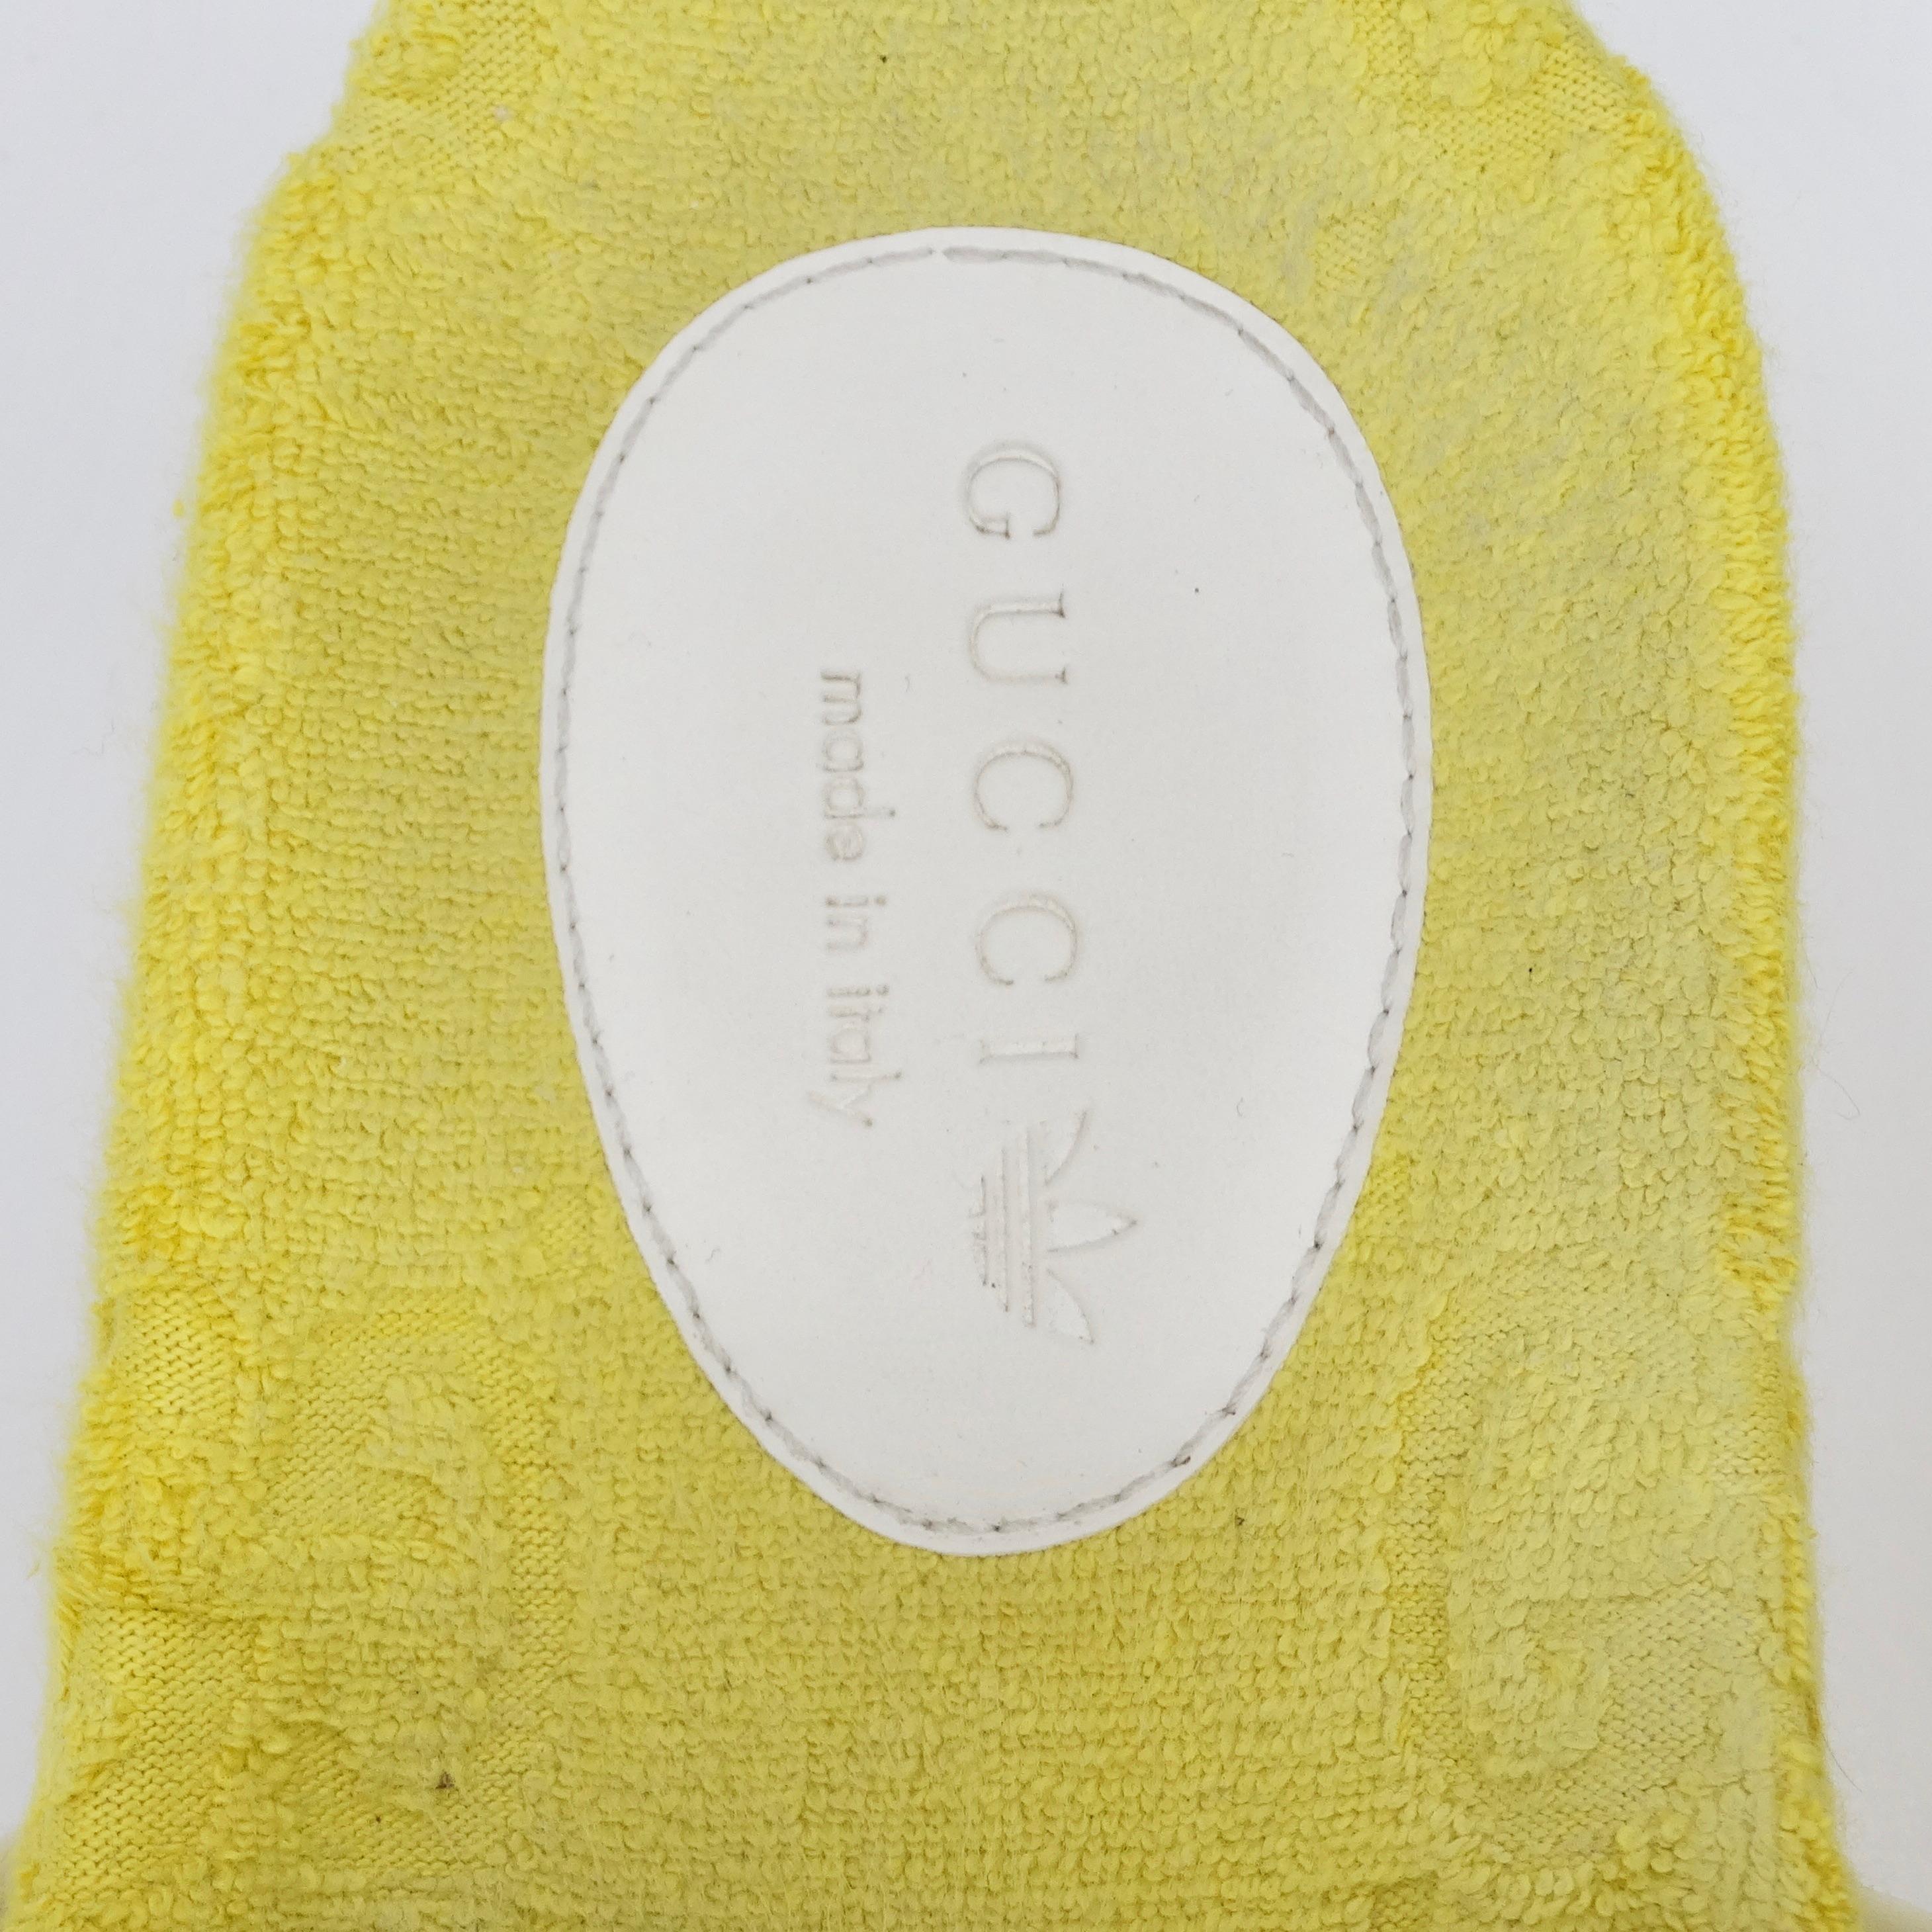 Gucci X Adidas Yellow Terry Cloth GG Monogram Platform Sandals  In Excellent Condition For Sale In Scottsdale, AZ